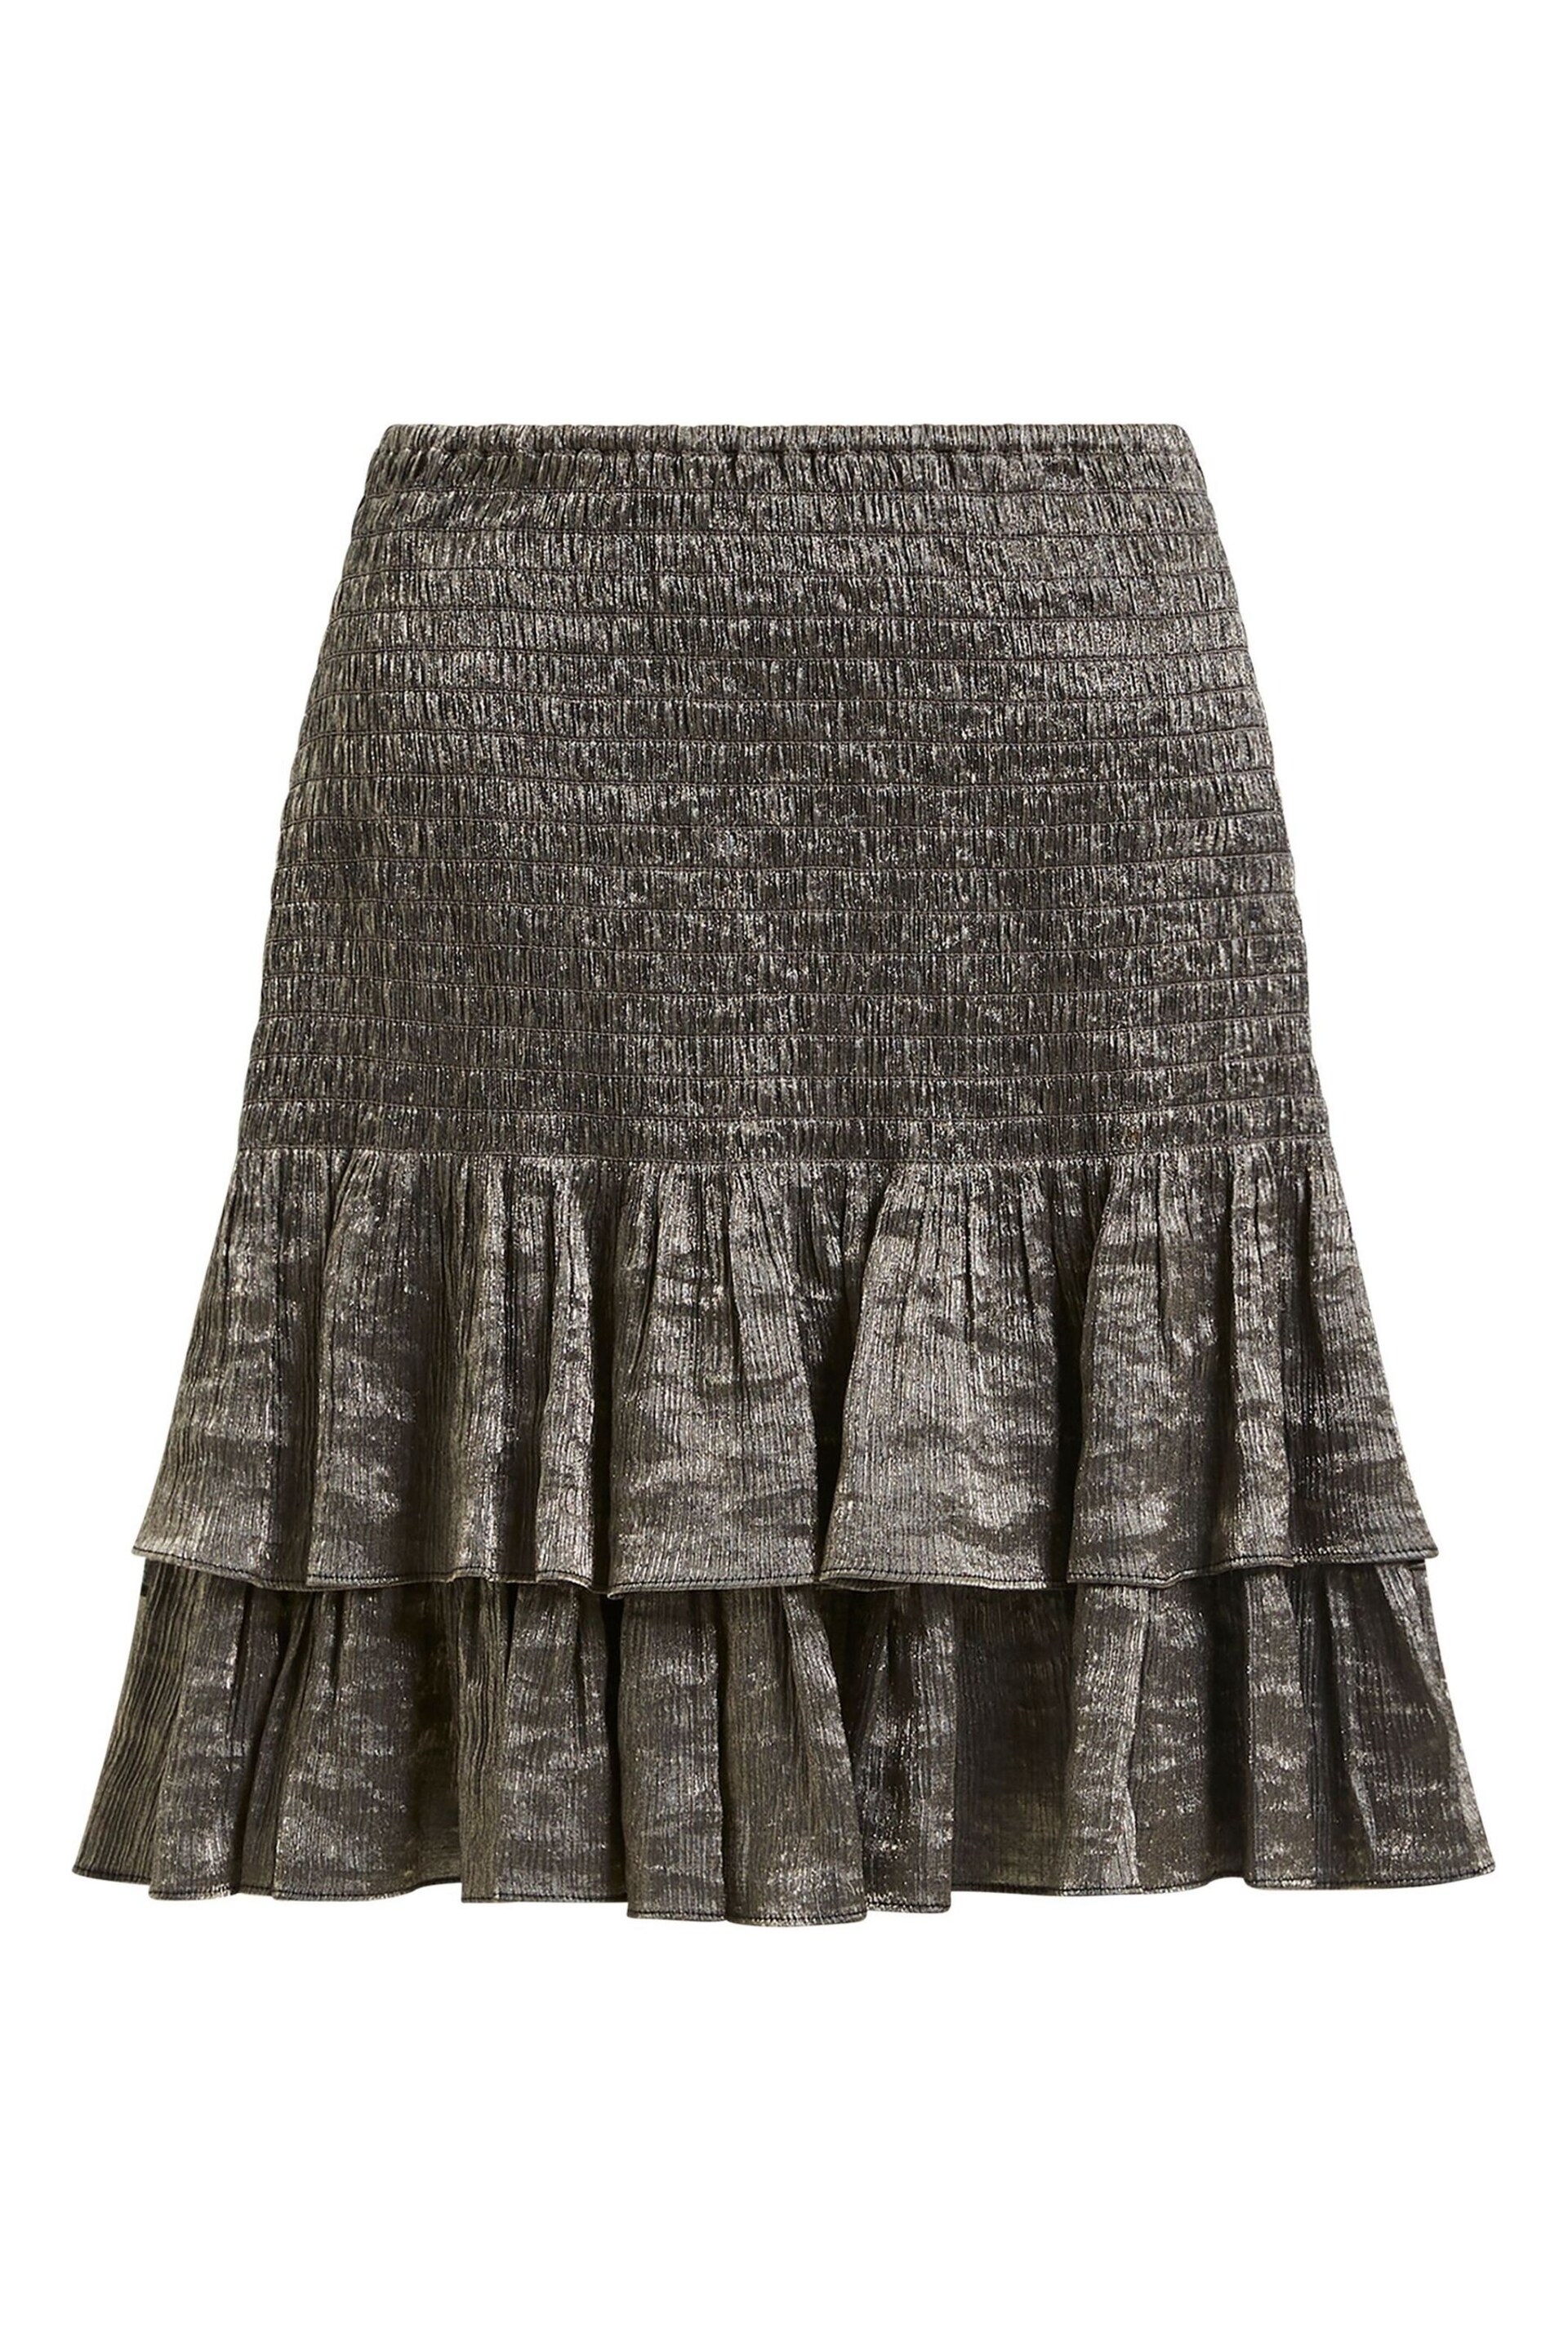 French Connection Dafne Satin Skirt - Image 5 of 5